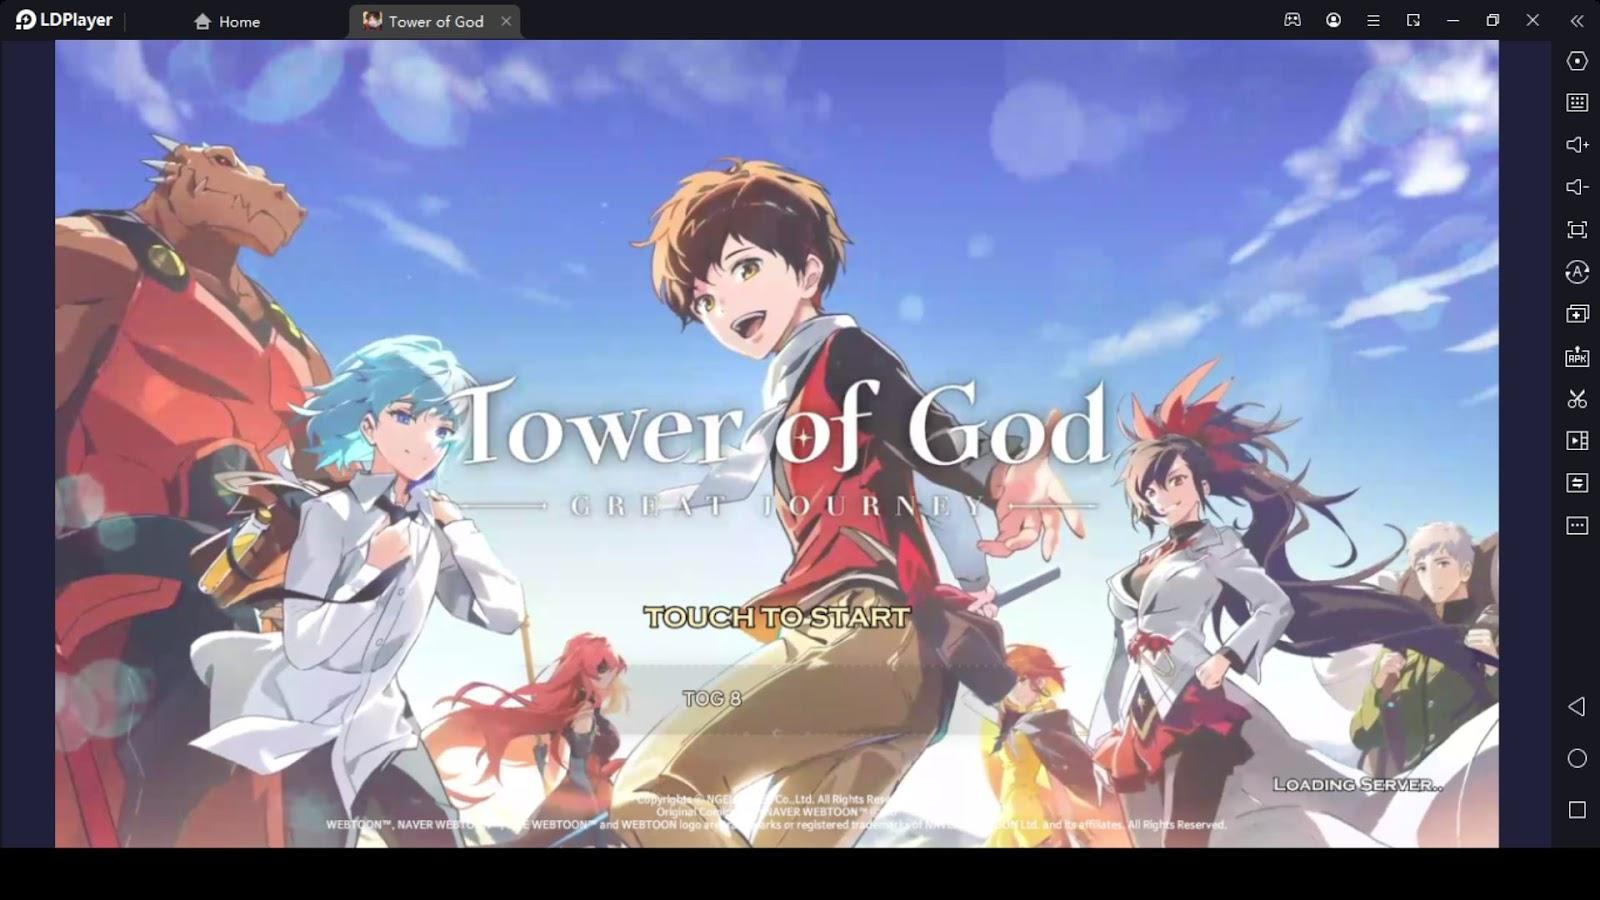 Tower Of God: New World Reroll - Droid Gamers